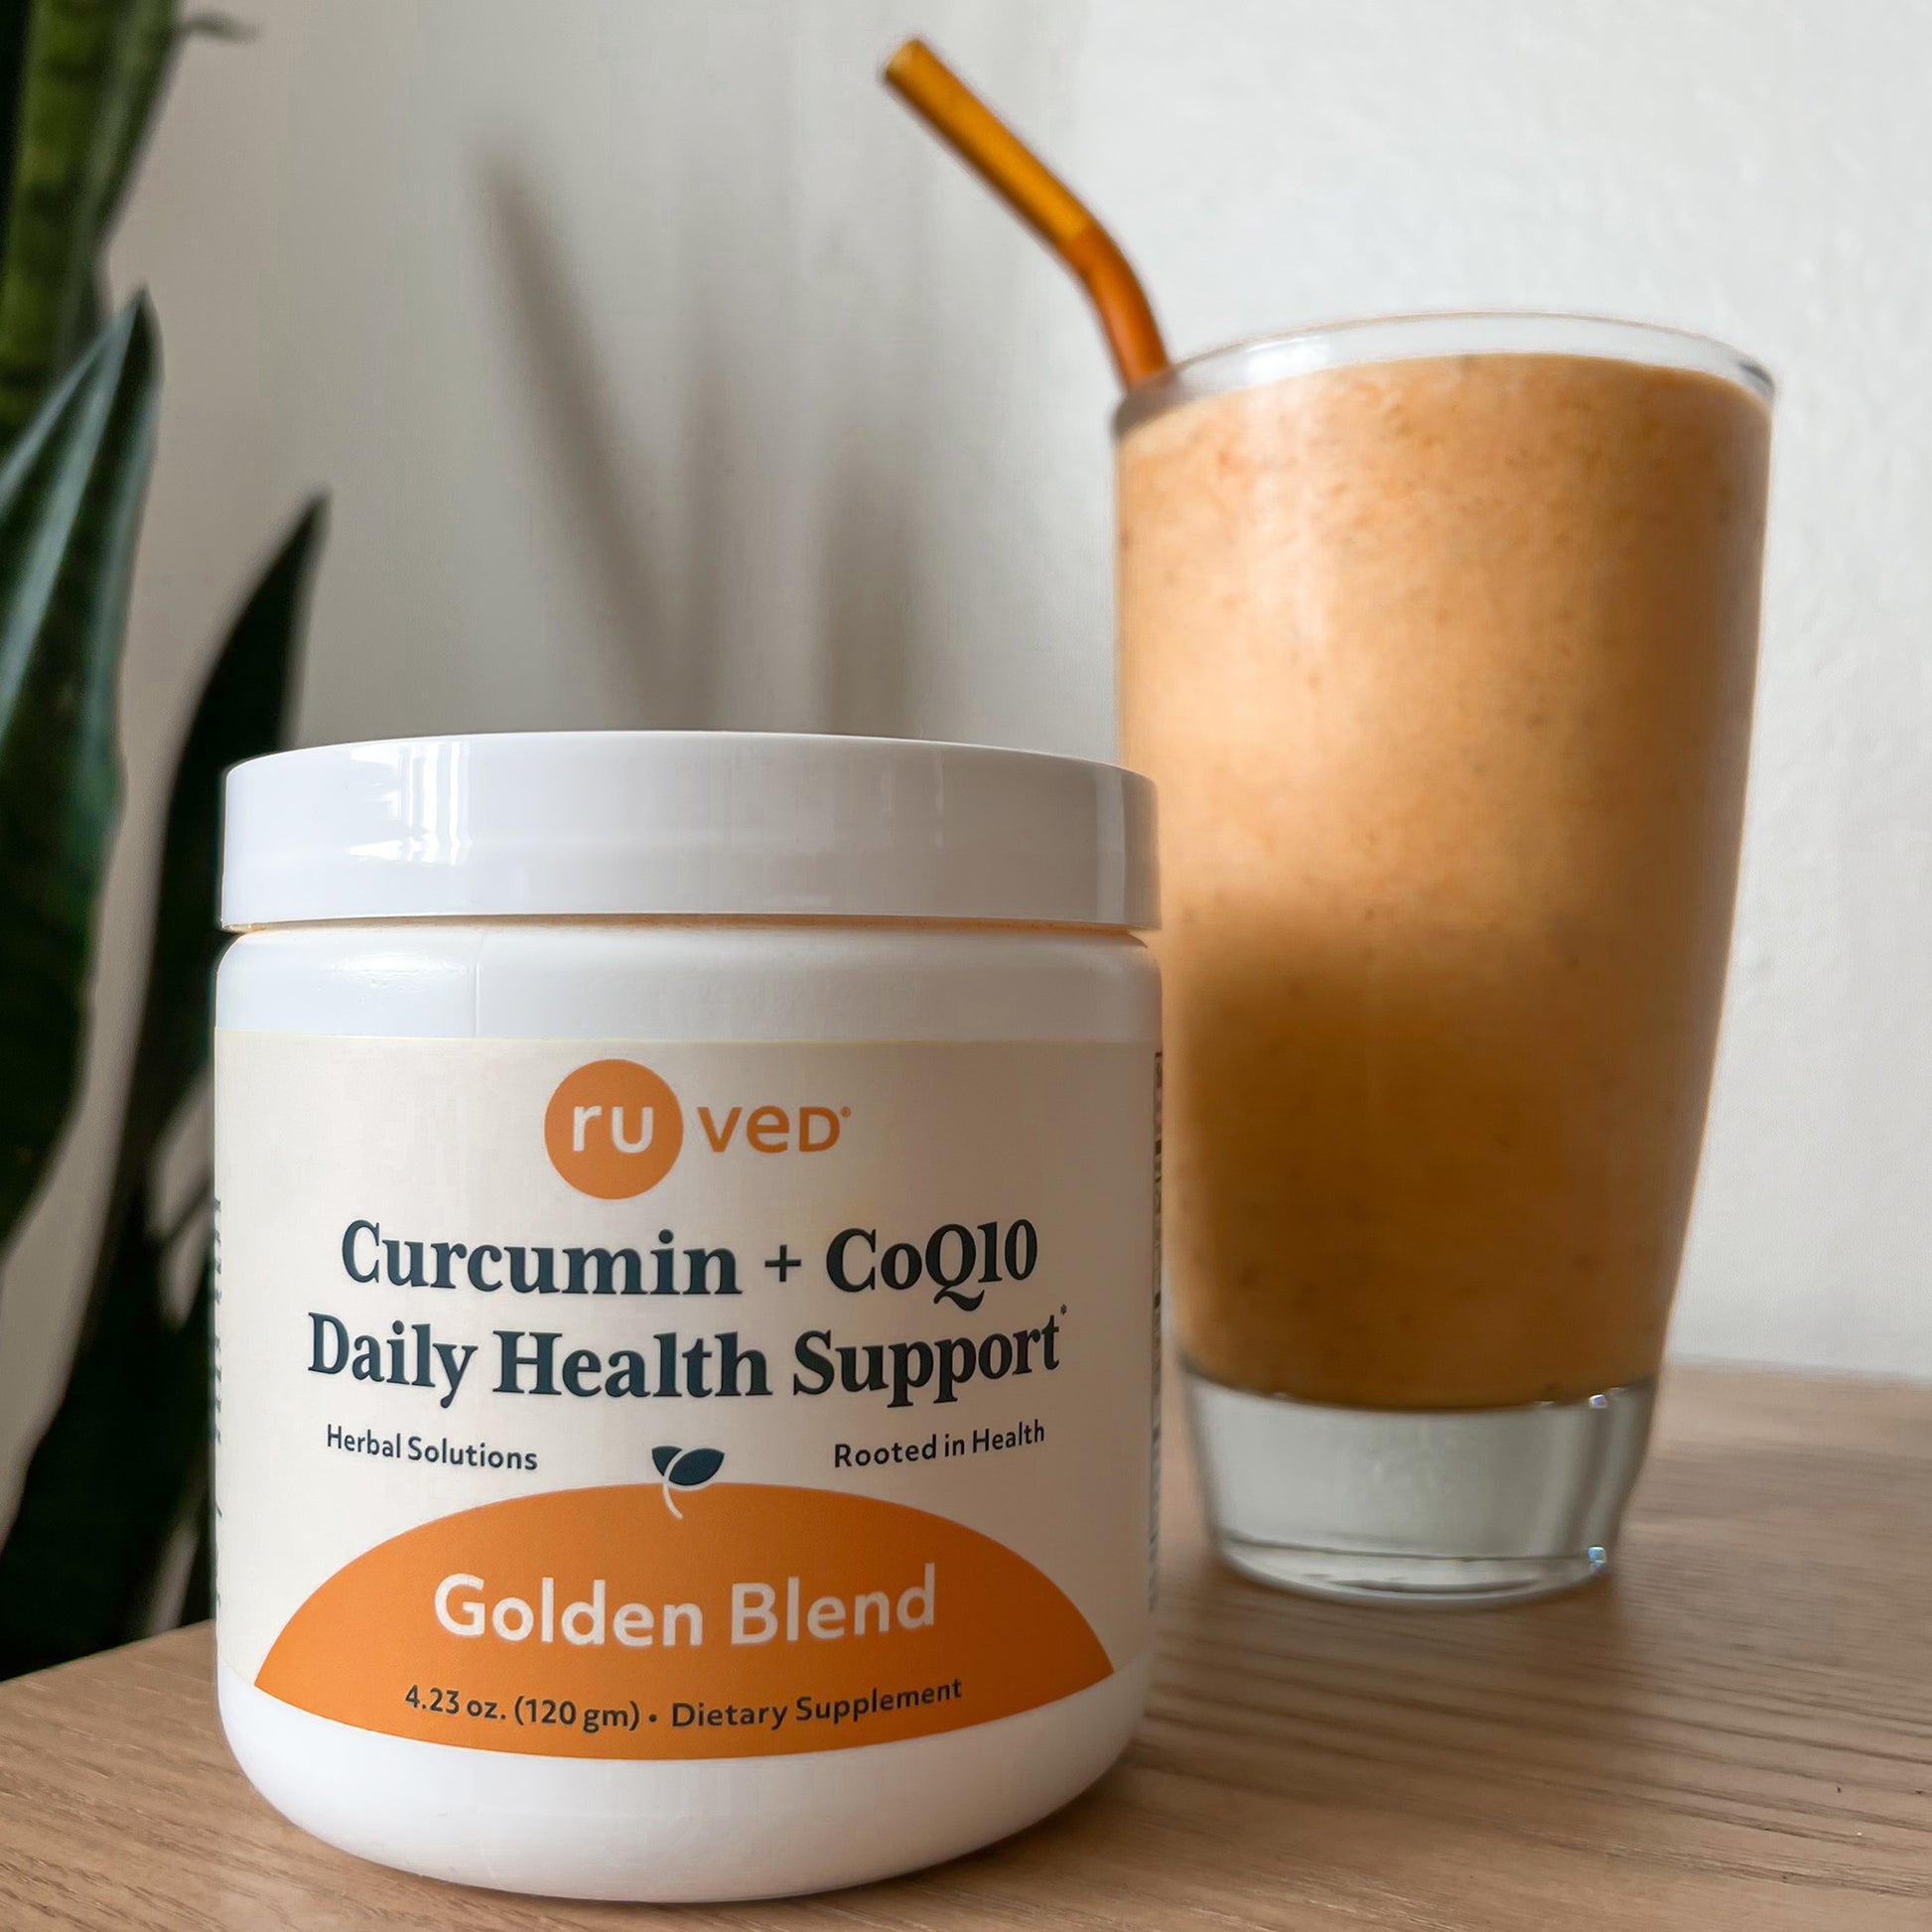 A smoothie made out of ruved Golden Blend. 